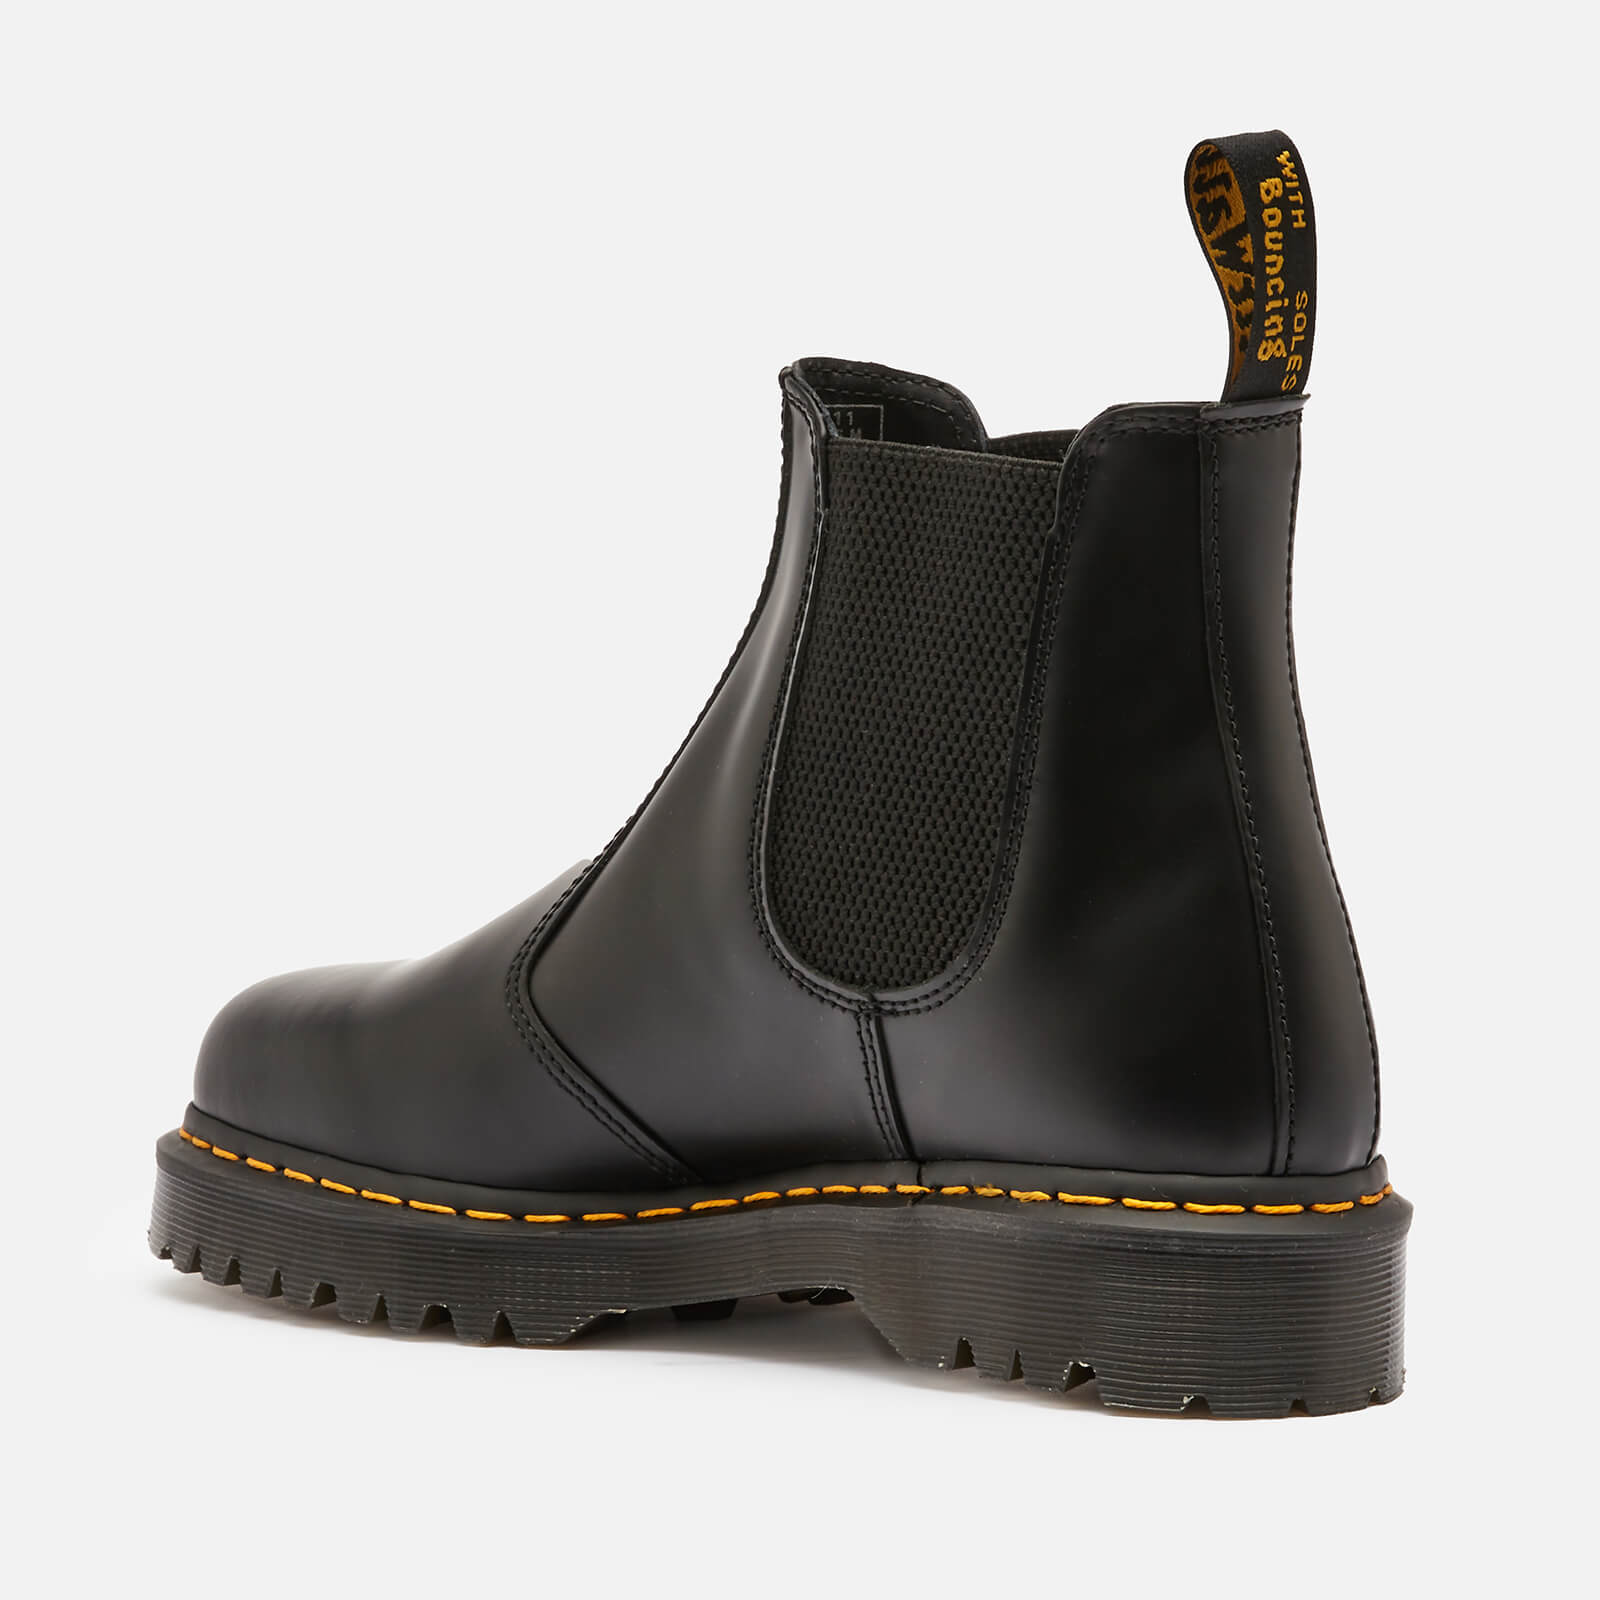 Dr. Martens 2976 Bex Smooth Leather Chelsea Boots - Black - Uk 3